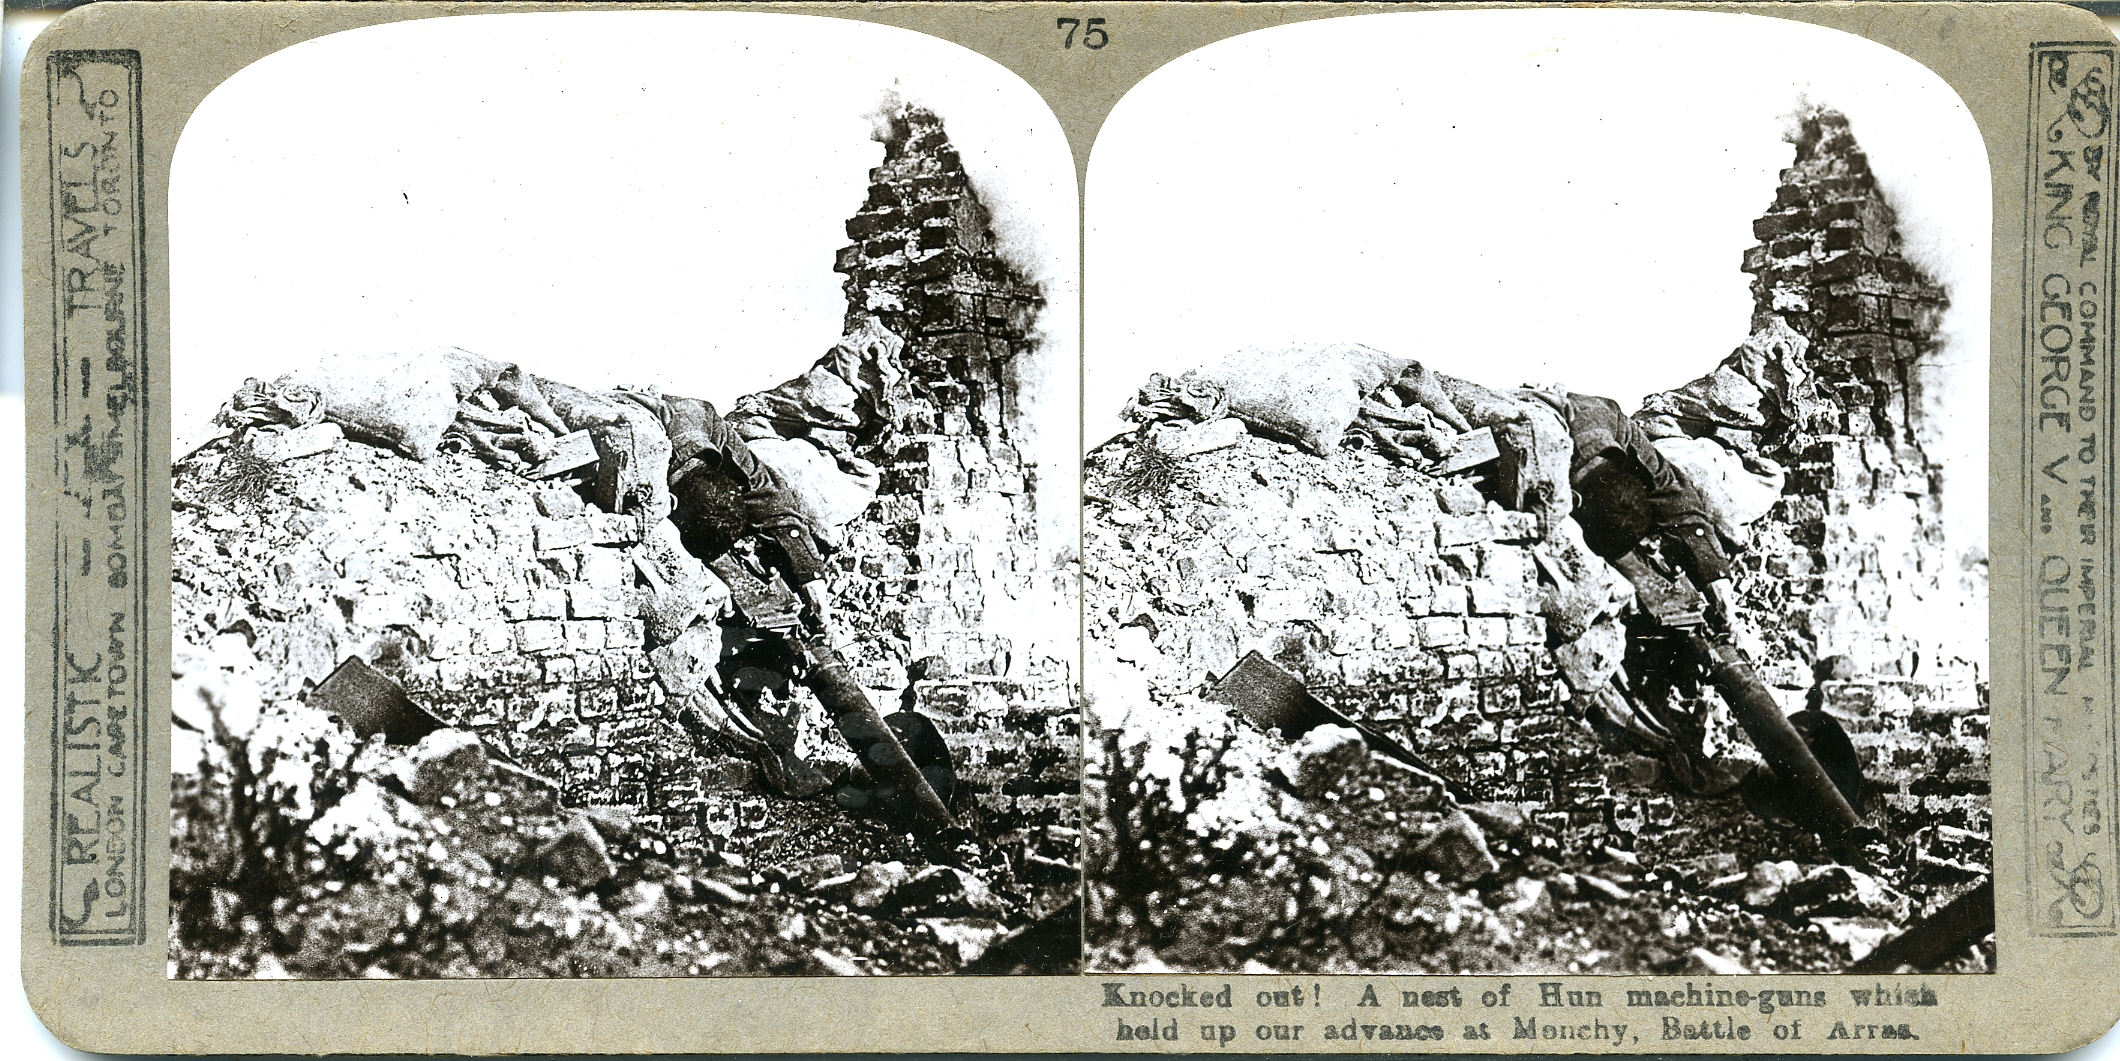 Knocked out! A nest of machine-guns which held up our advance at Monchy, Battle of Arras